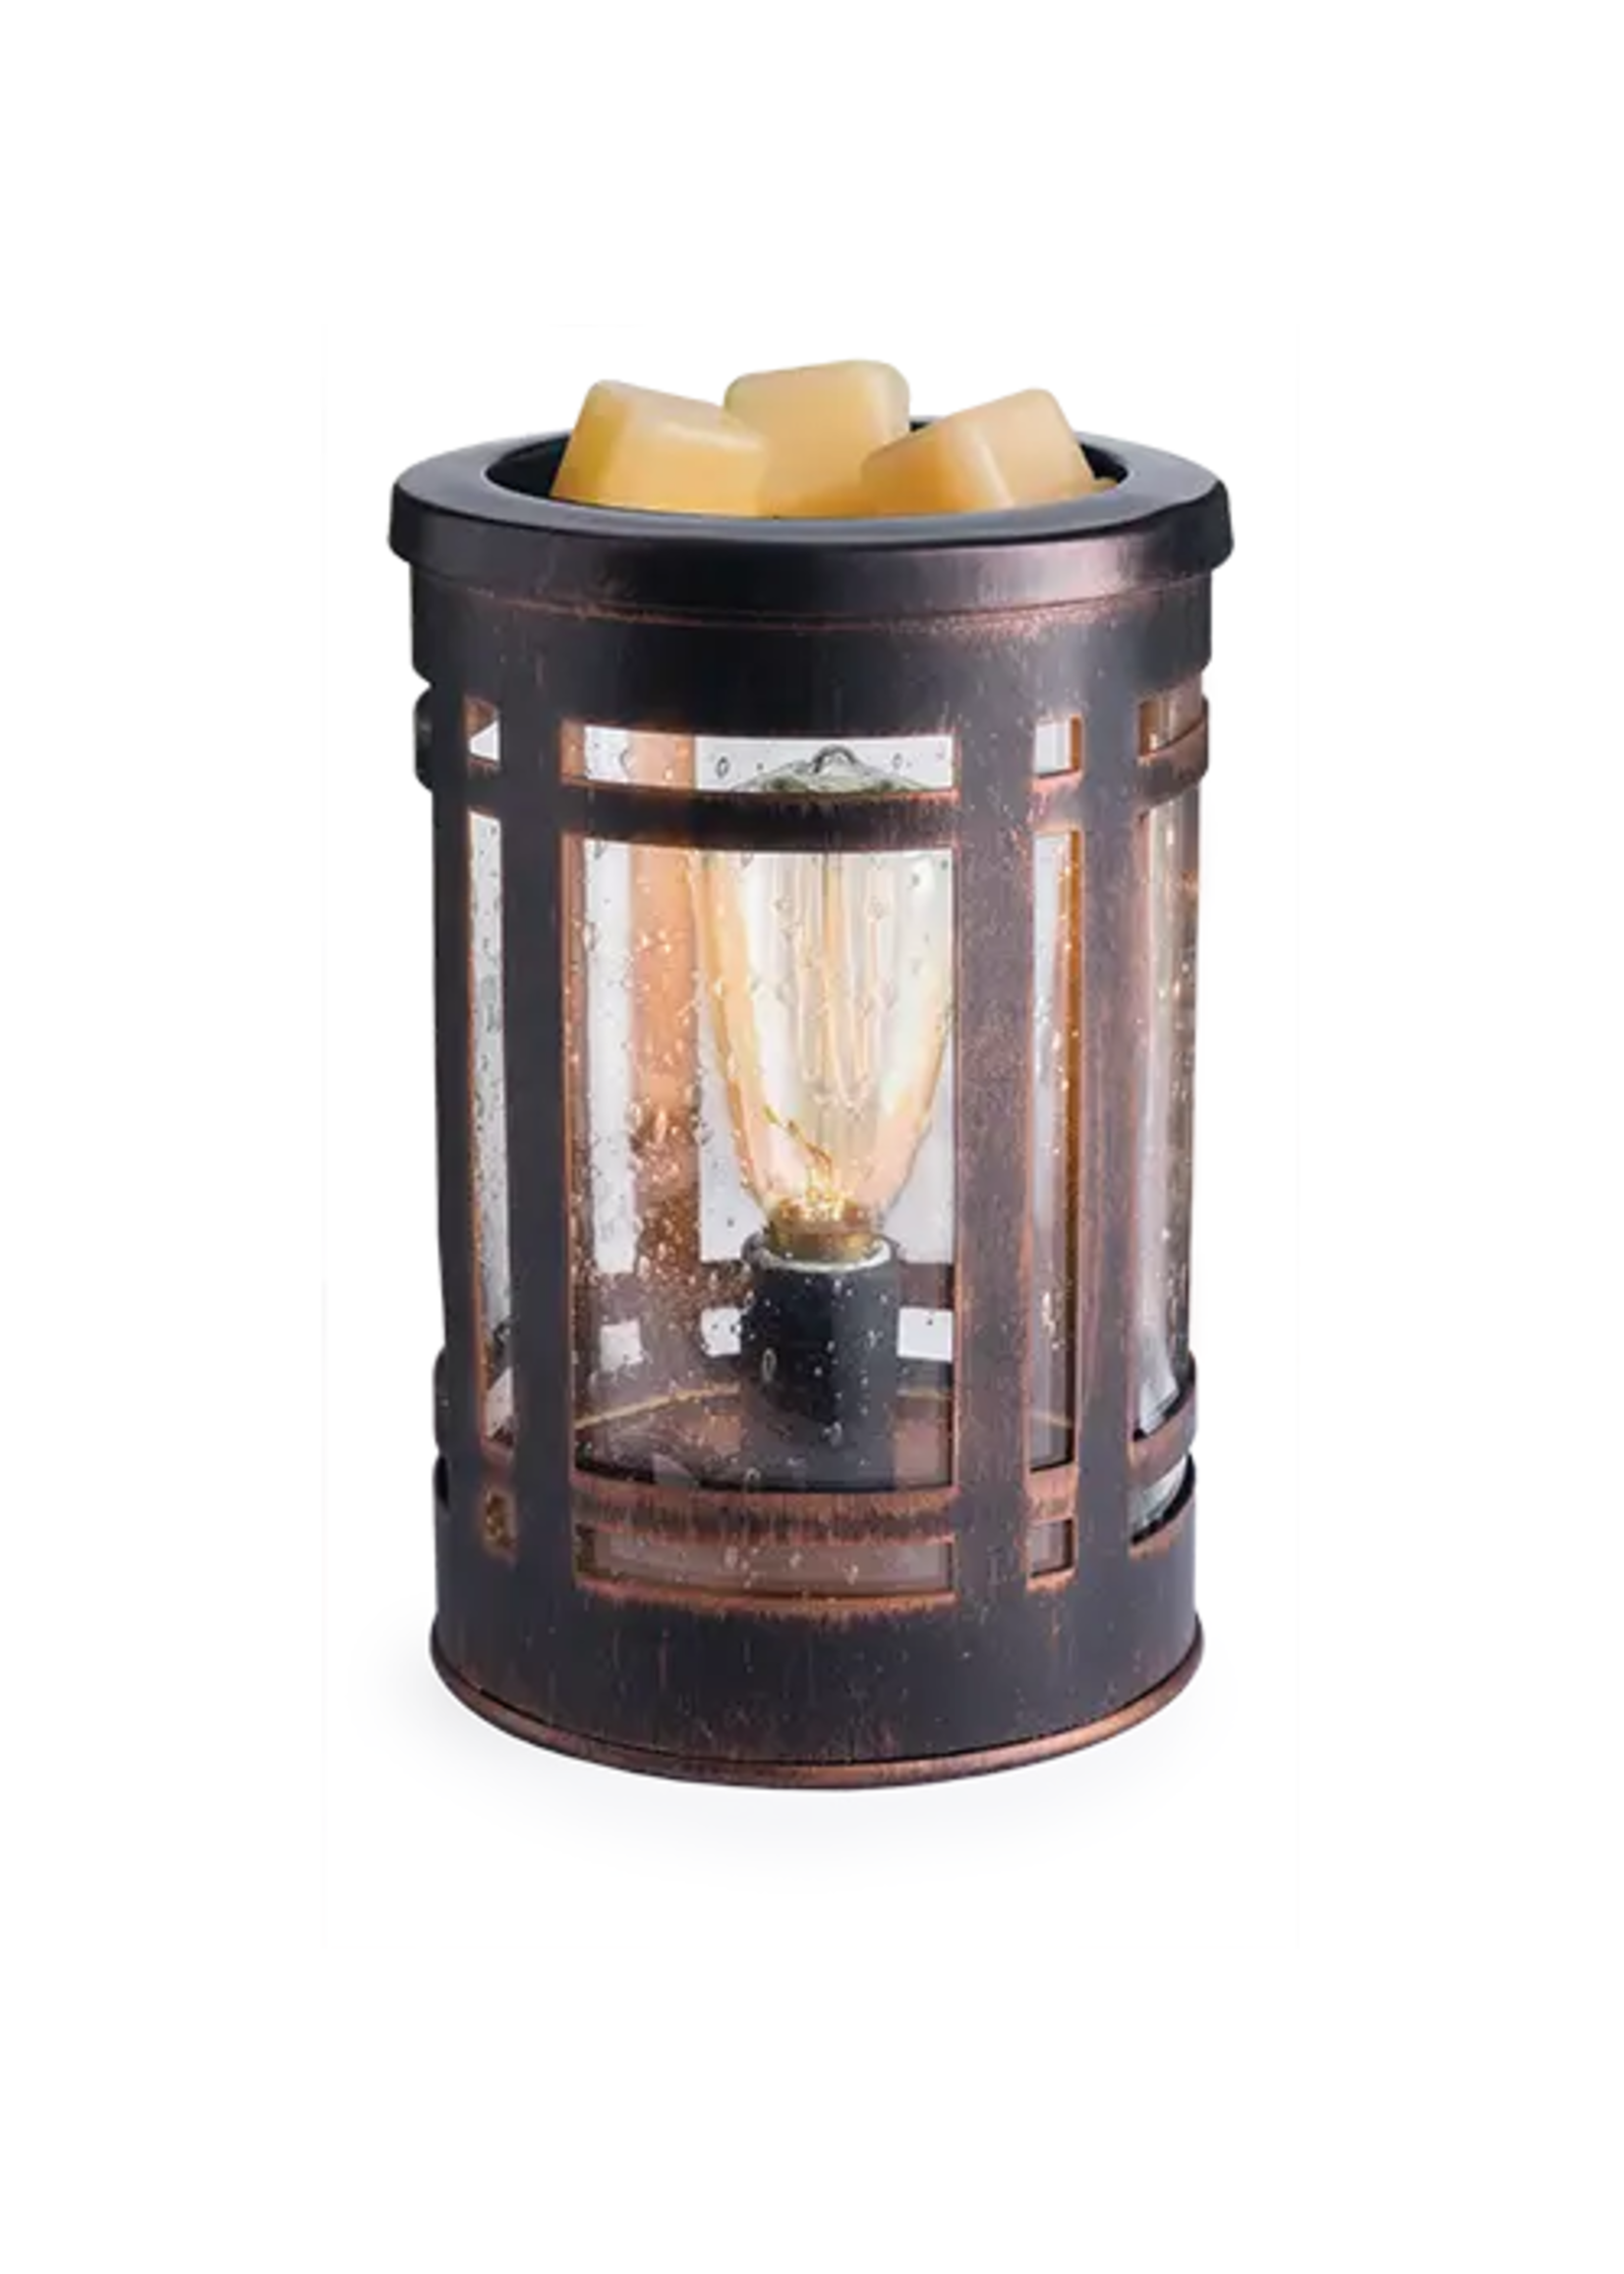 Old World Edison Bulb Wax Melter & Candle Warmer - Prim in Proper